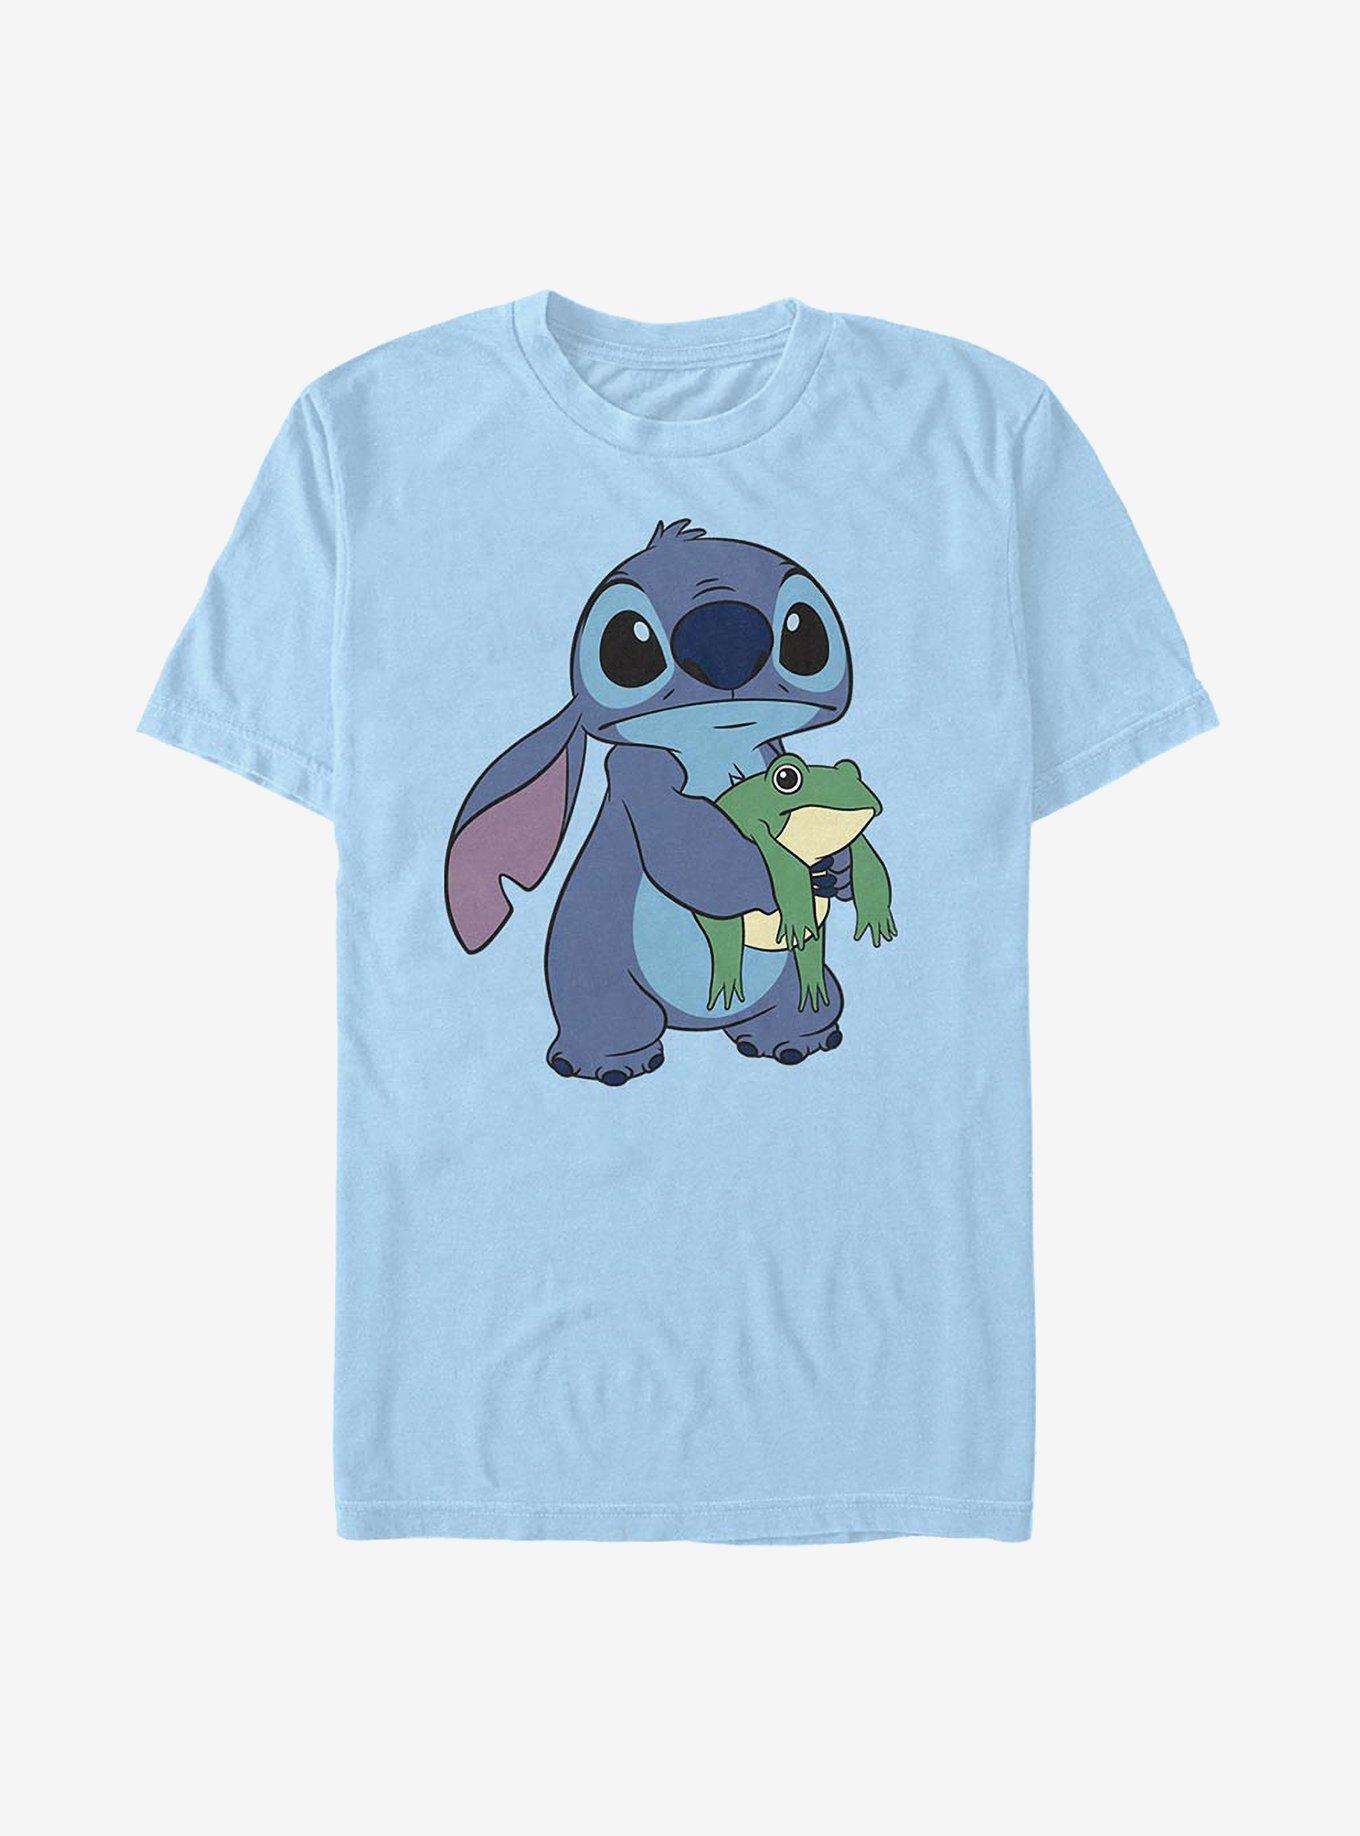 Disney Lilo and Stitch T-Shirt | Tie Dye Stitch Clothing for Kids |  Official Lilo & Stitch Gifts for Girls